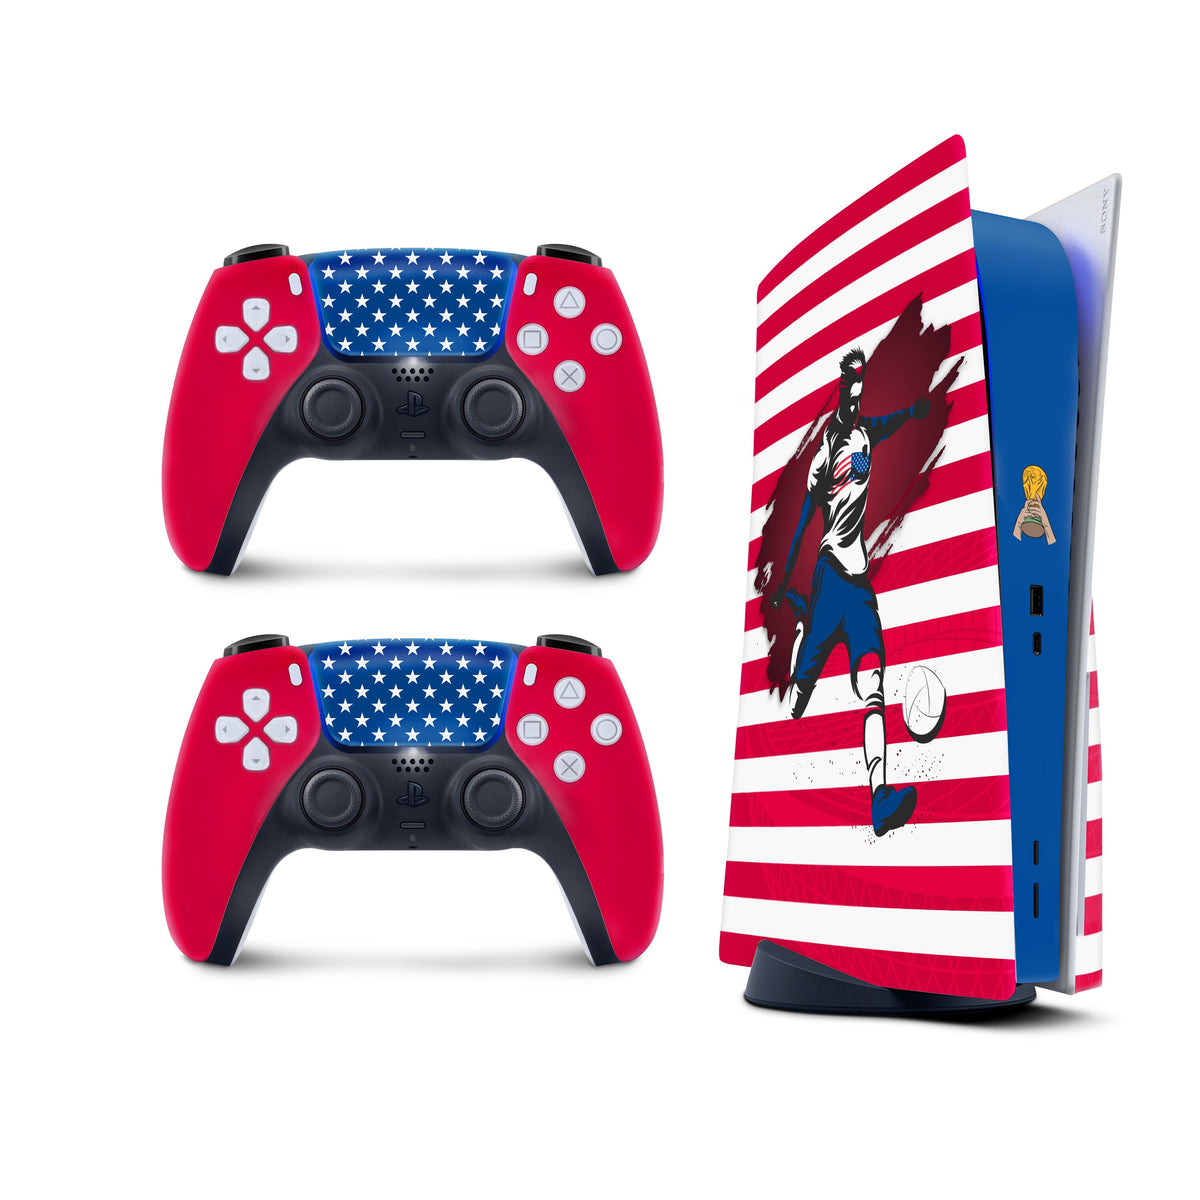 PS4 Controller Skin Sticker Decal Vinyl Wrap Cover for PlayStation